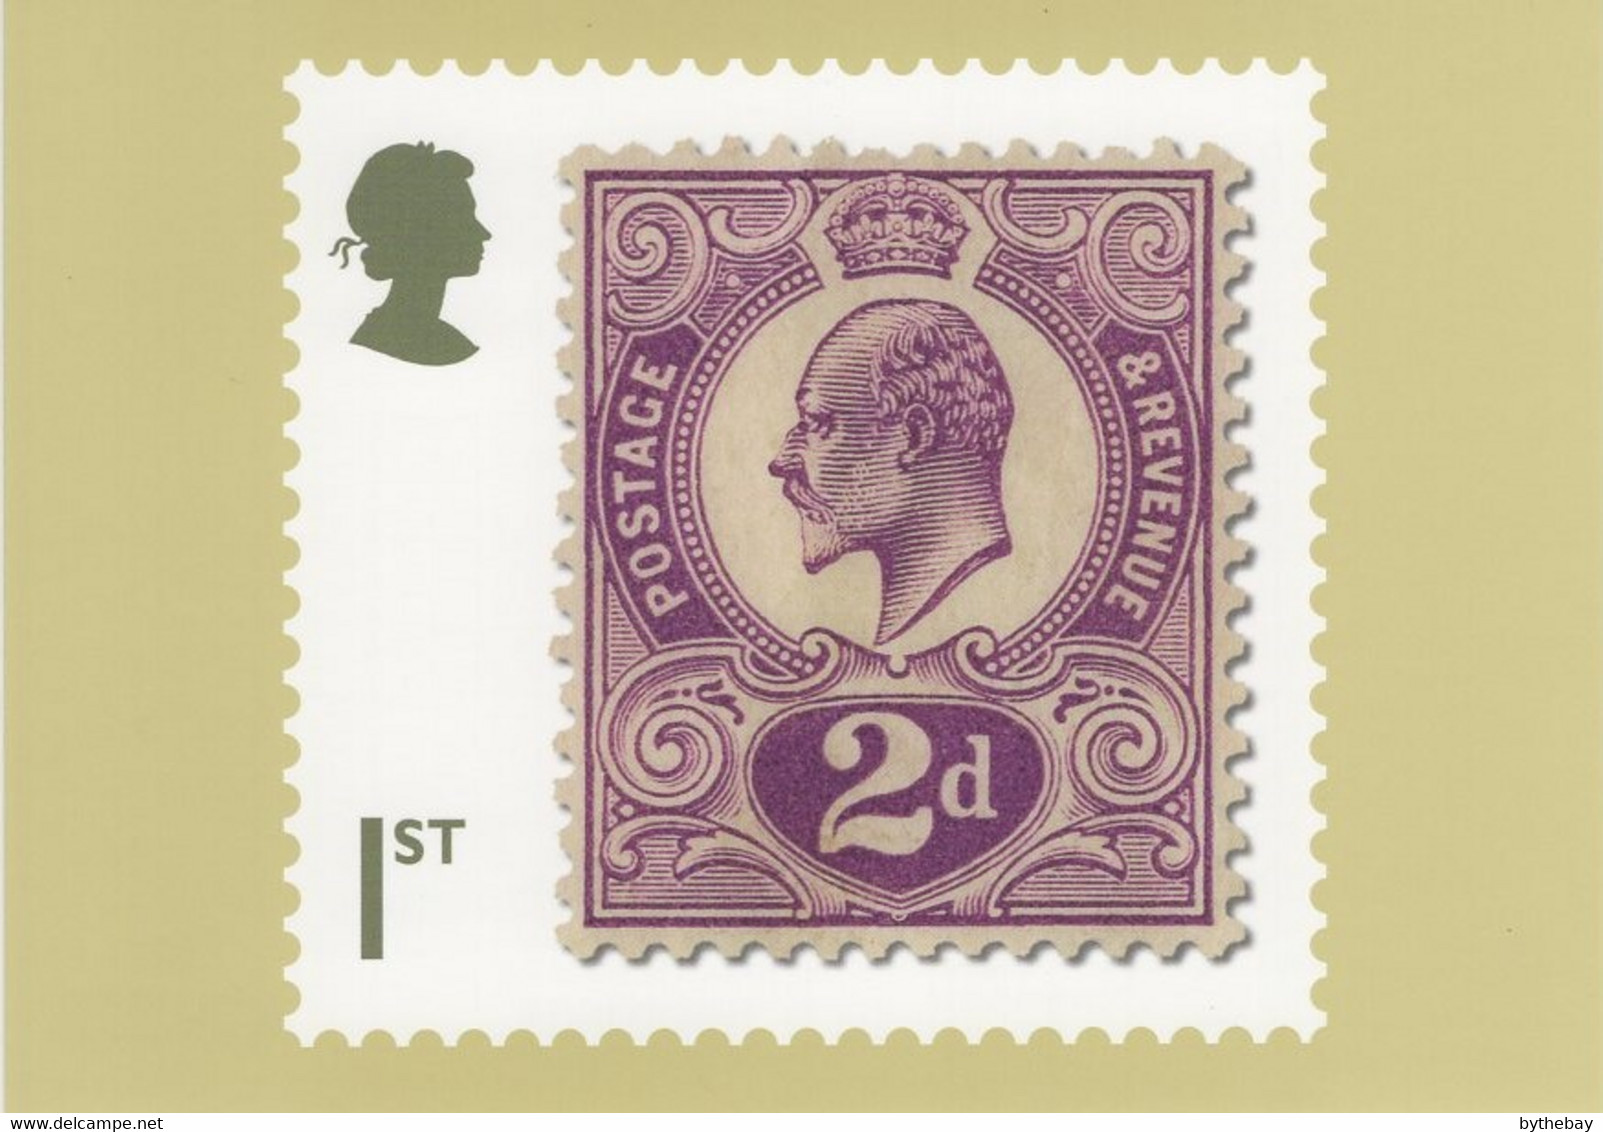 Great Britain 2019 PHQ Card Sc 3802b 1st 1p Edward VII Unissued Classic British Stamps - Cartes PHQ